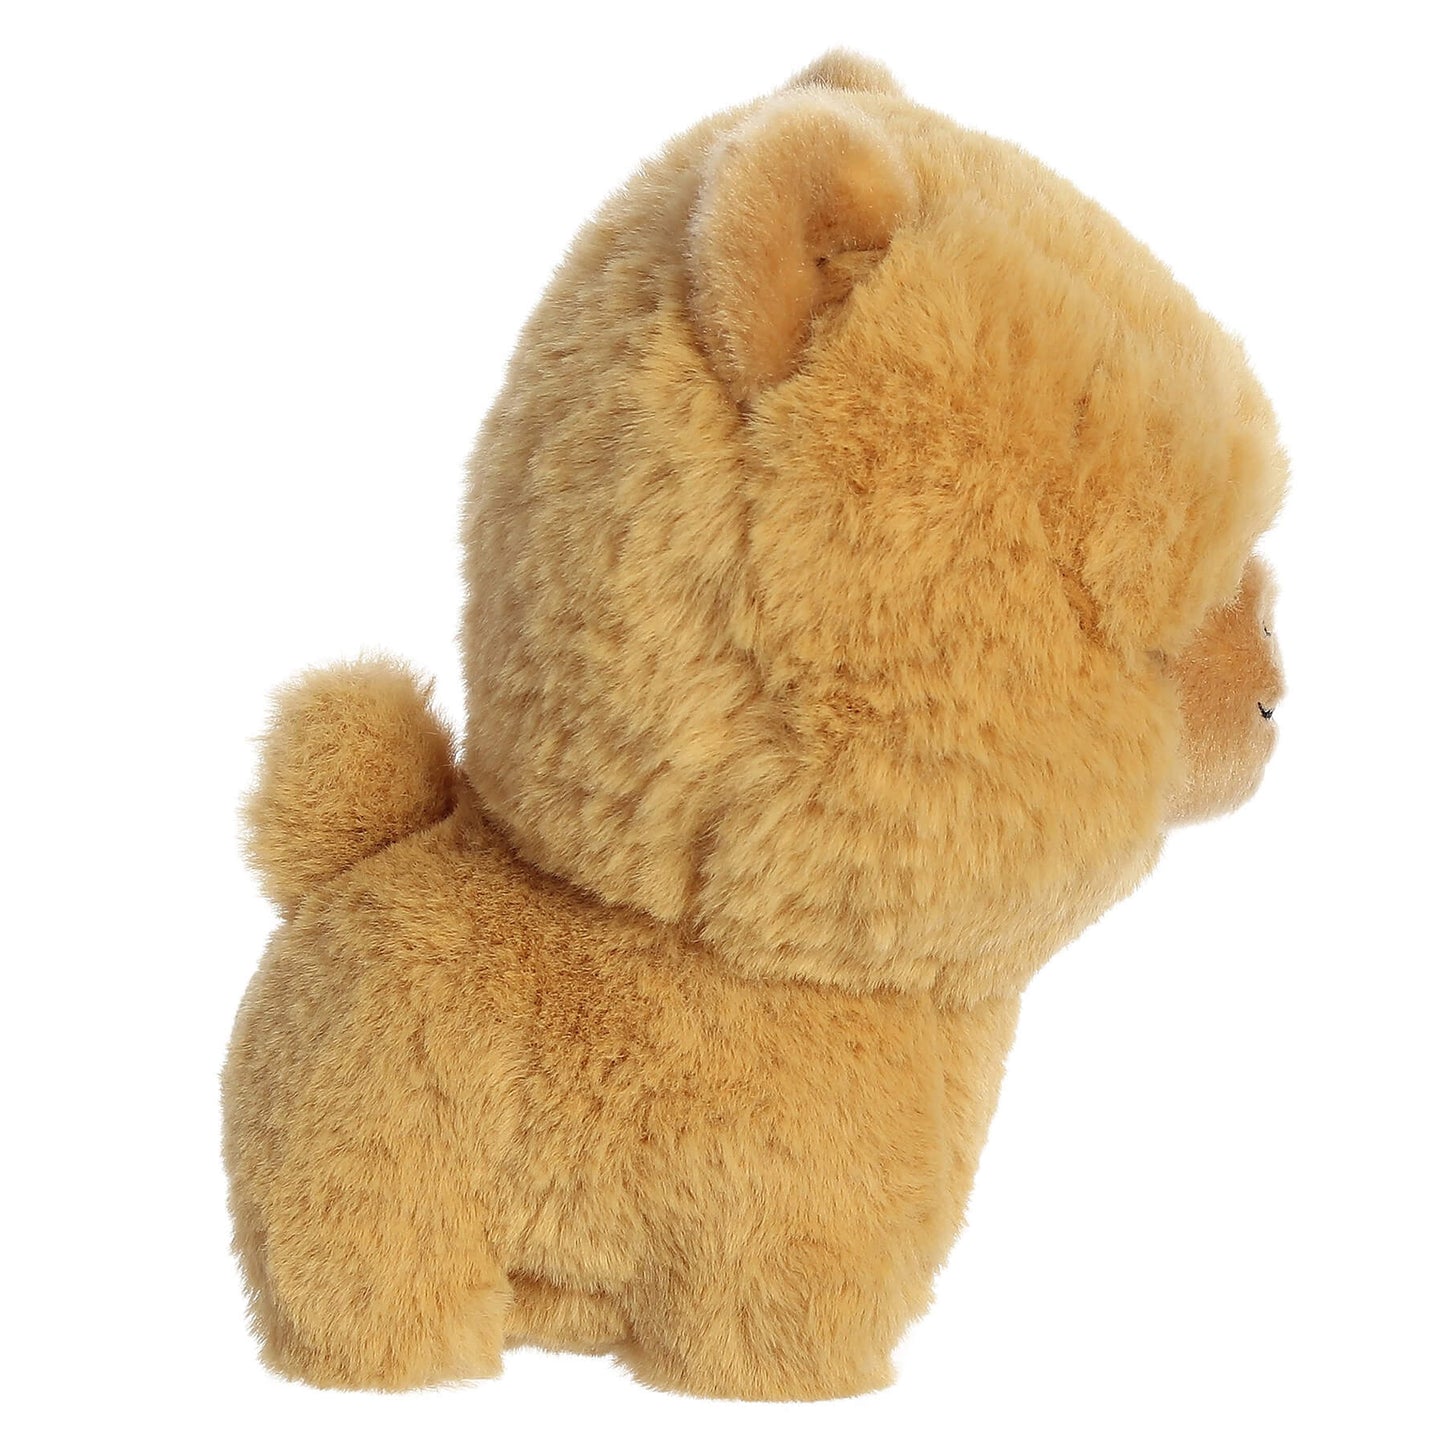 Chow Chow Dog Puppy 7"